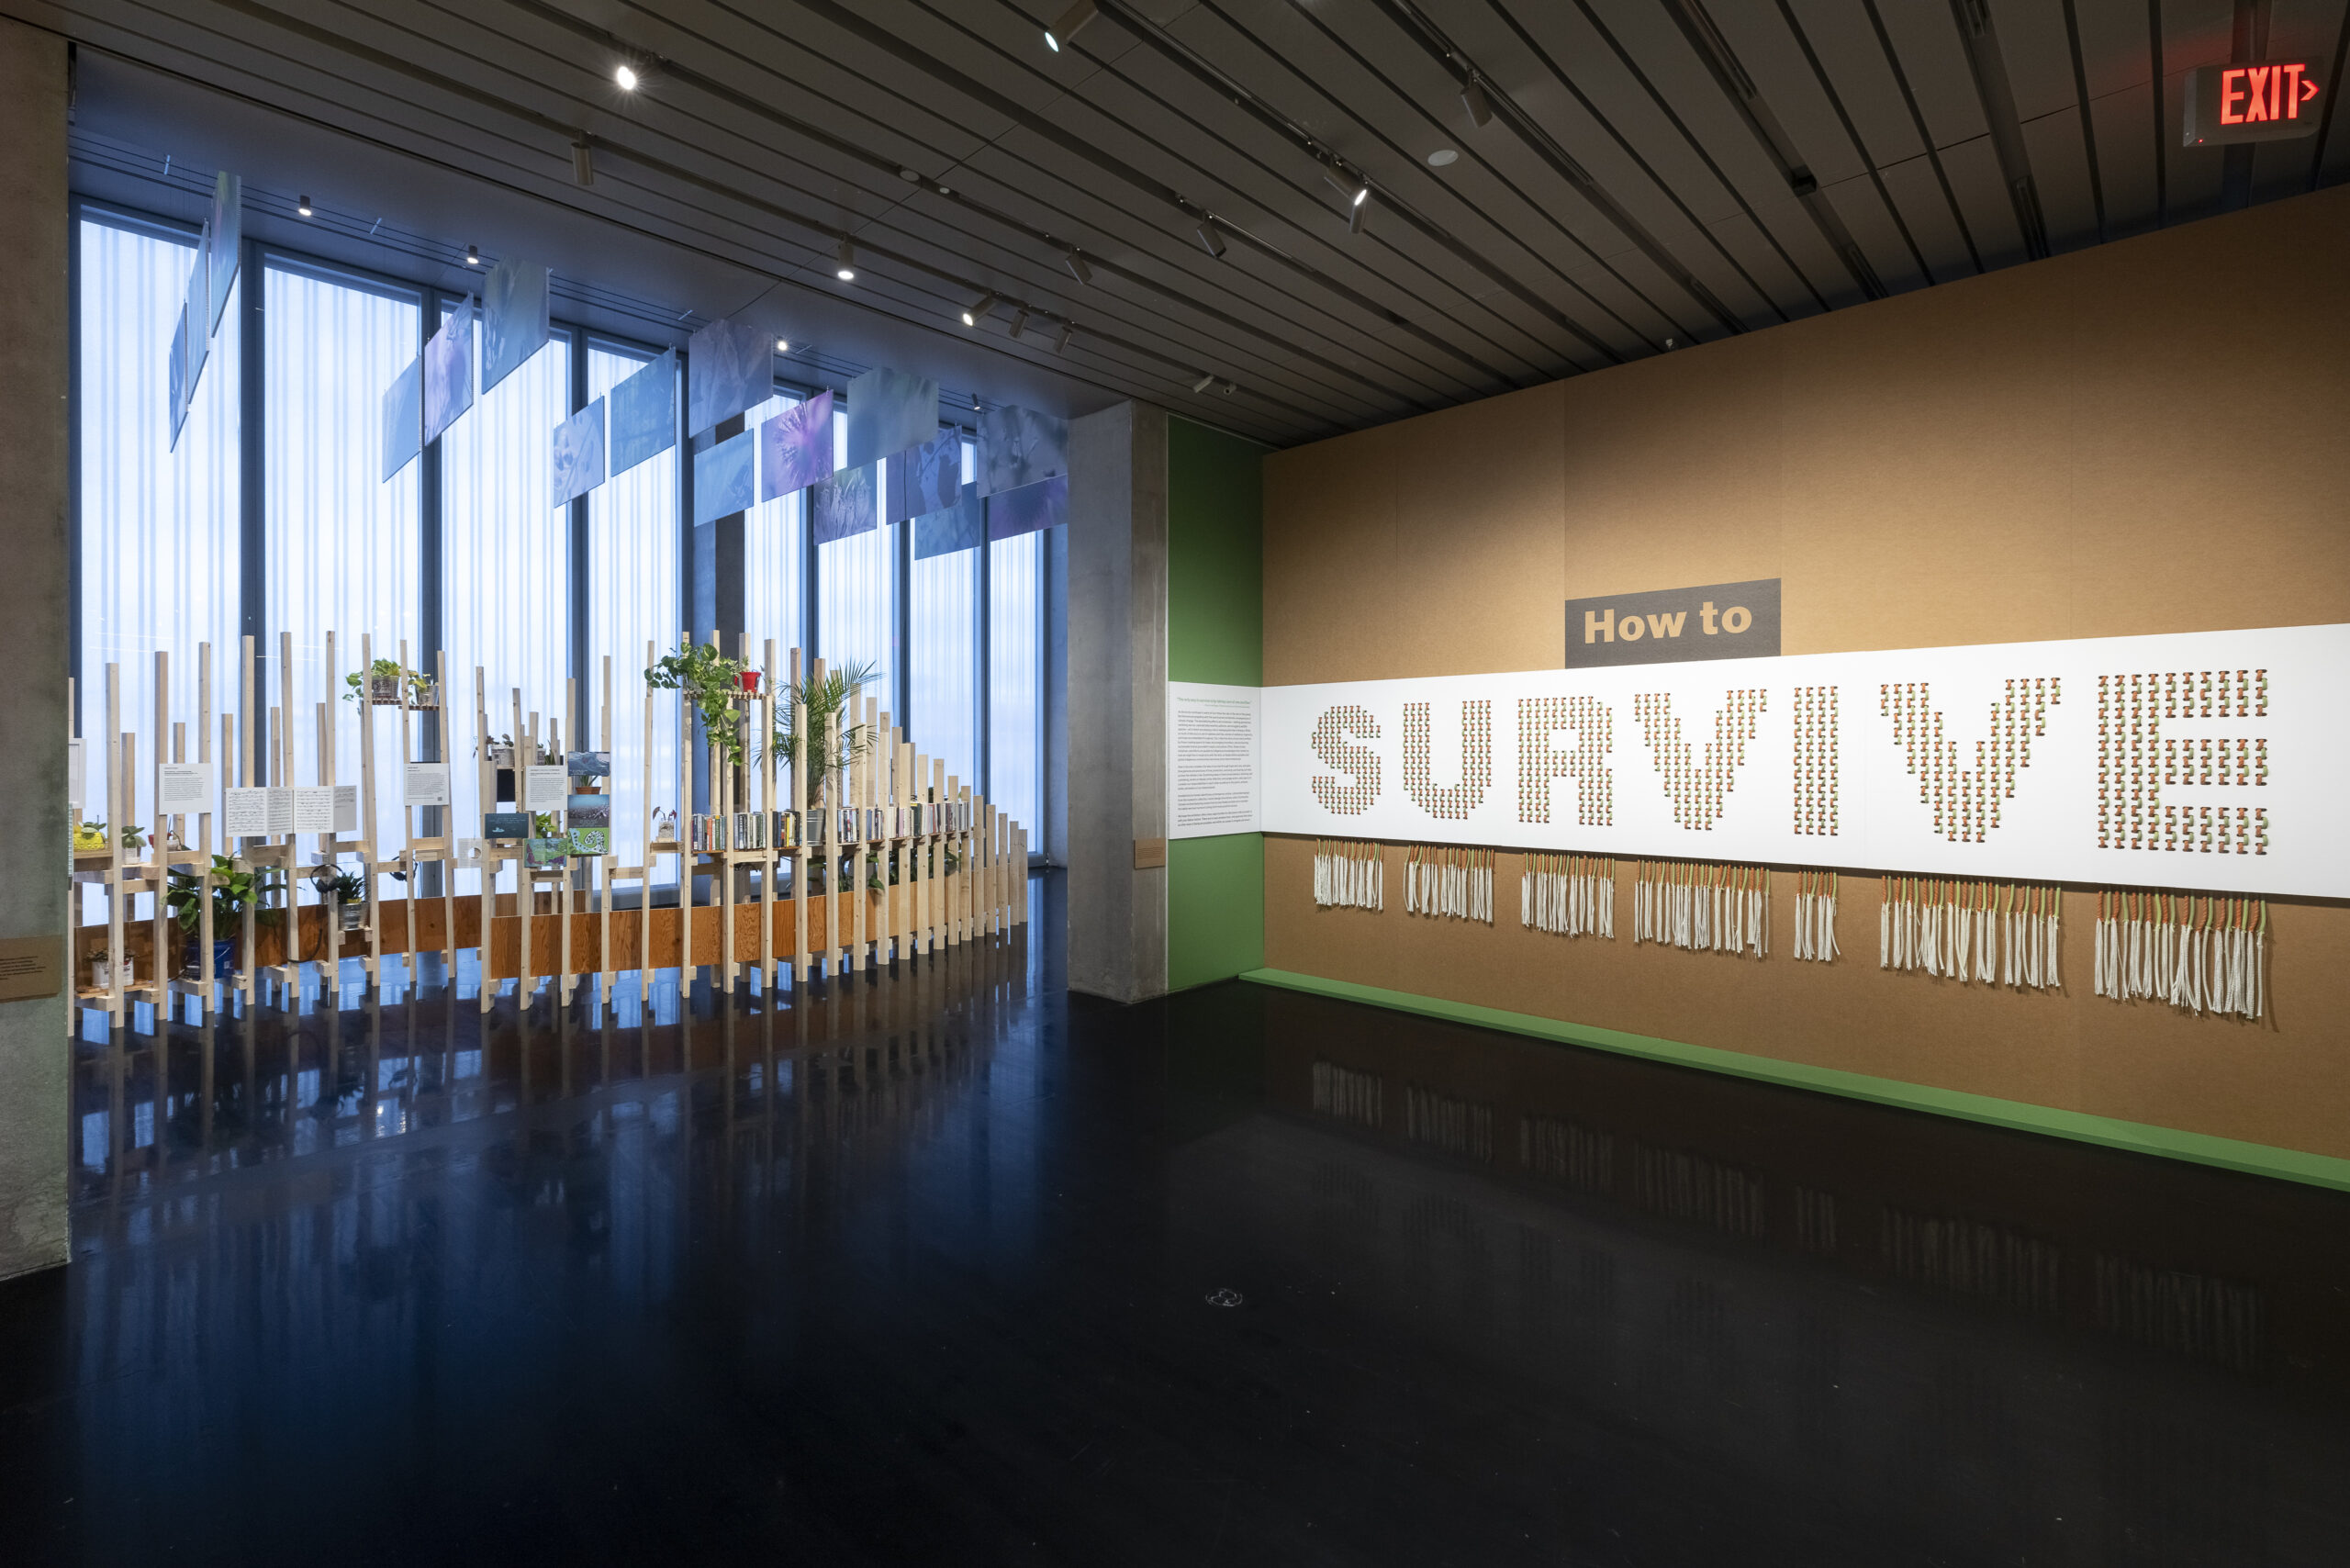 The entrance to a museum exhibit. The title of the exhibit, "How to Survive," is displayed on a wall.